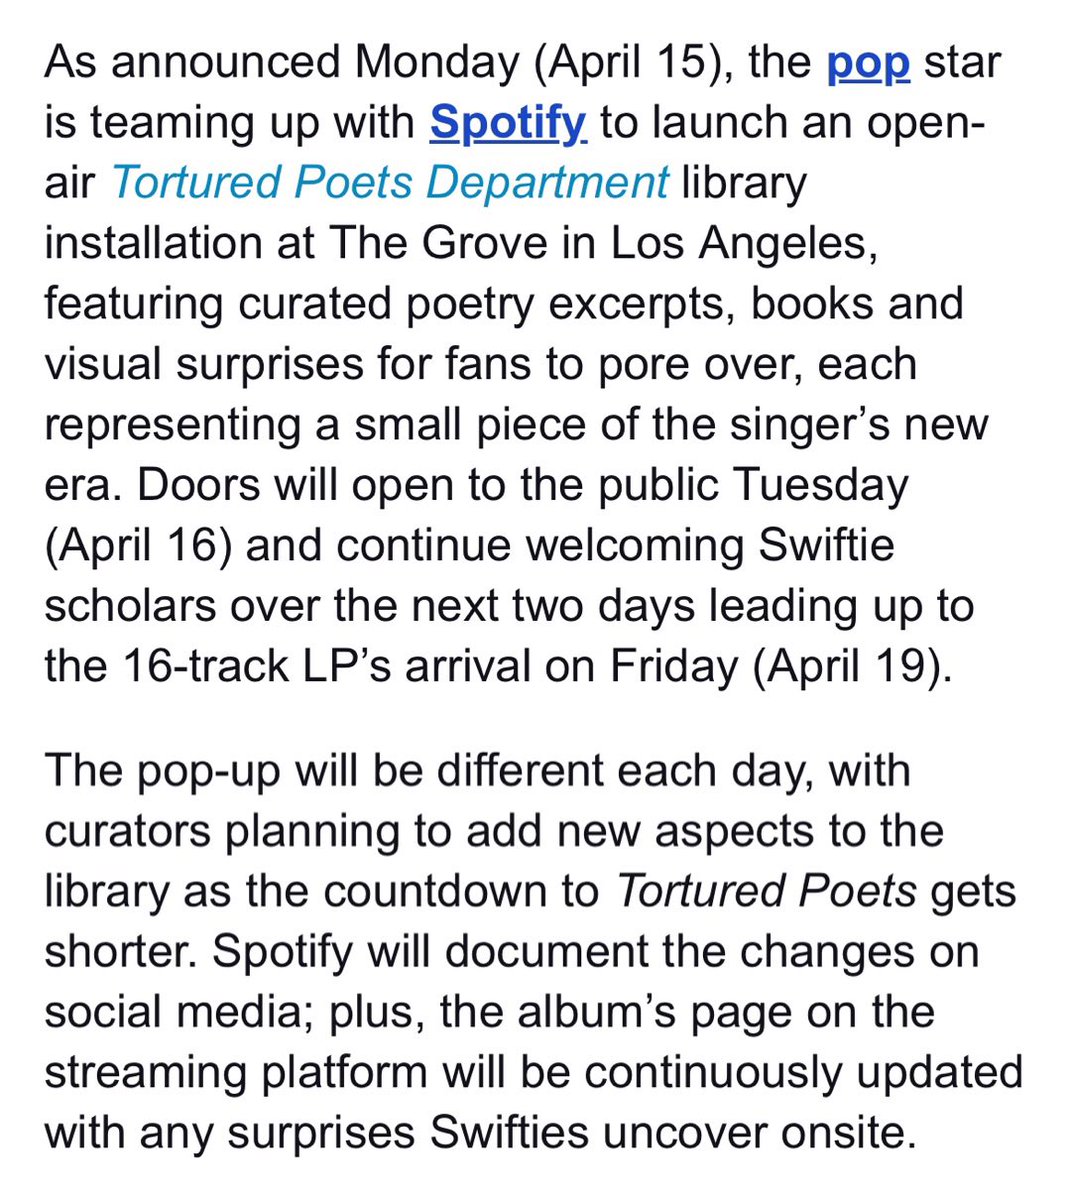 📝| More details about @Spotify's pop-up for TTPD at The Grove! Via @billboard — Features curated poetry excerpts, books, and visual surprises representative of the album. — It will be different each day! New aspects will be added to the library as the countdown shortens.